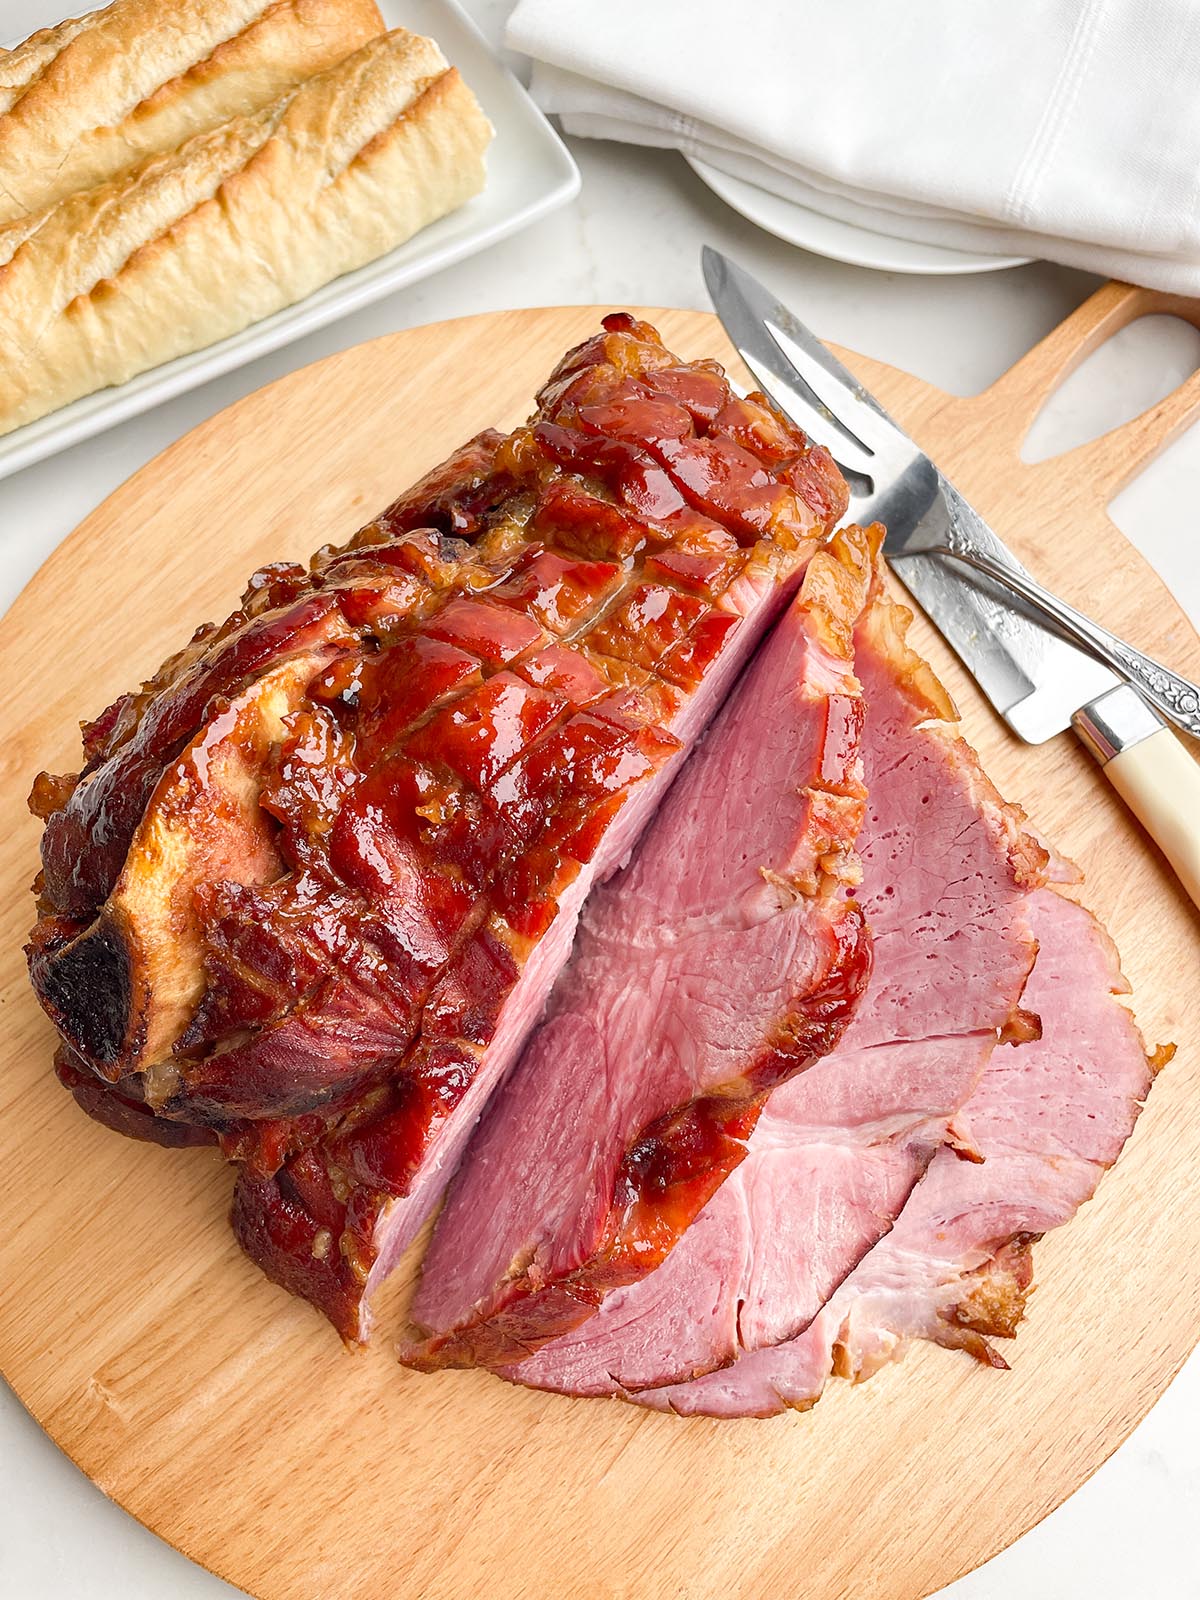 glazed roaster oven ham cut into slices on a wooden cutting board.